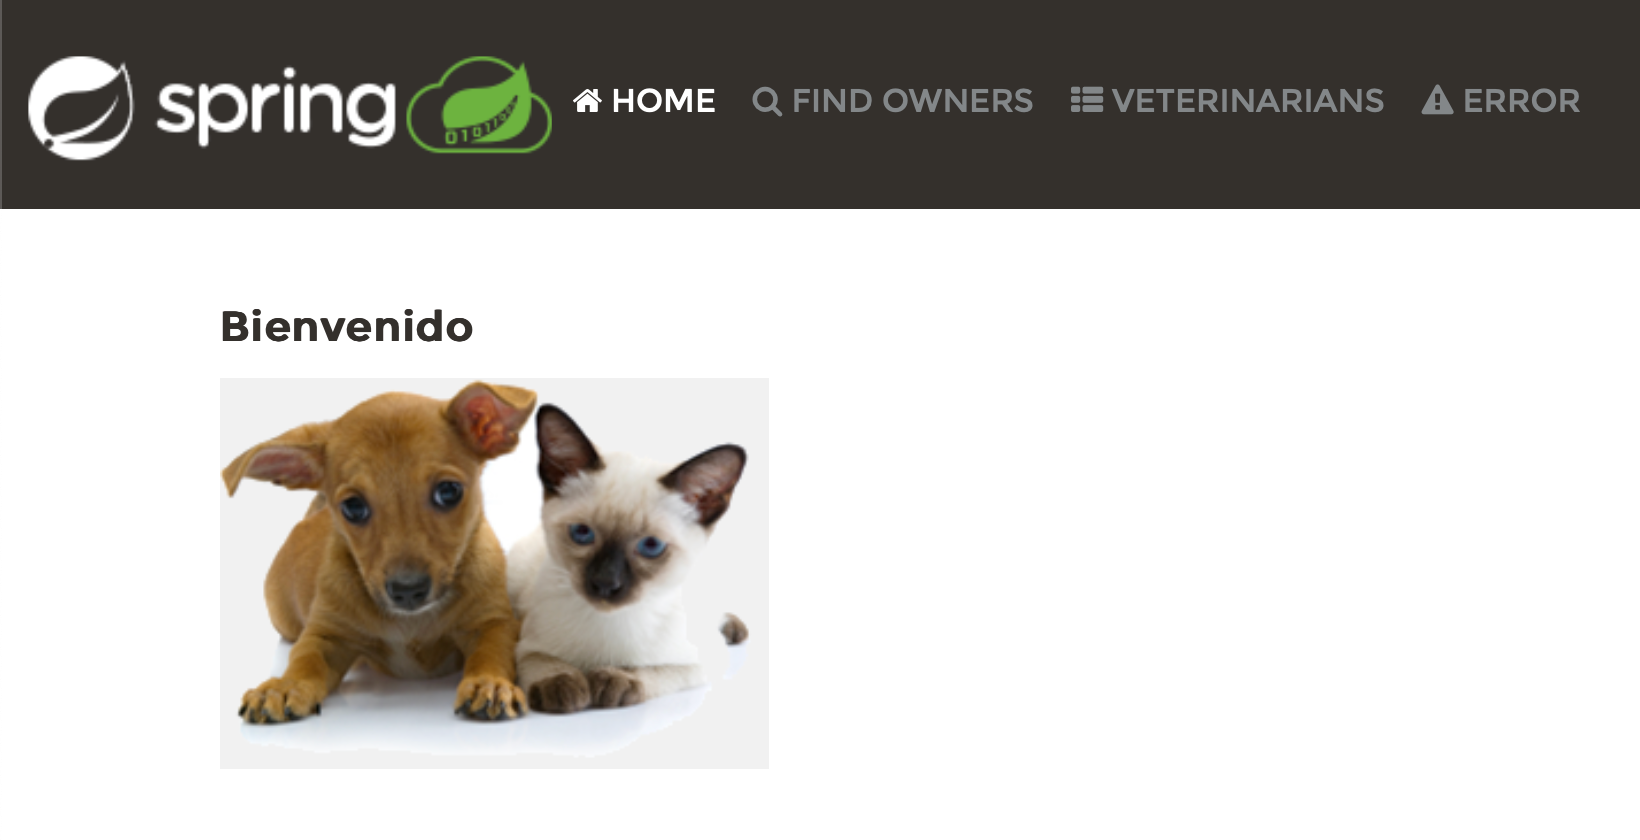 Spring Petclinic home page with welcome message in Spanish and the rest in English